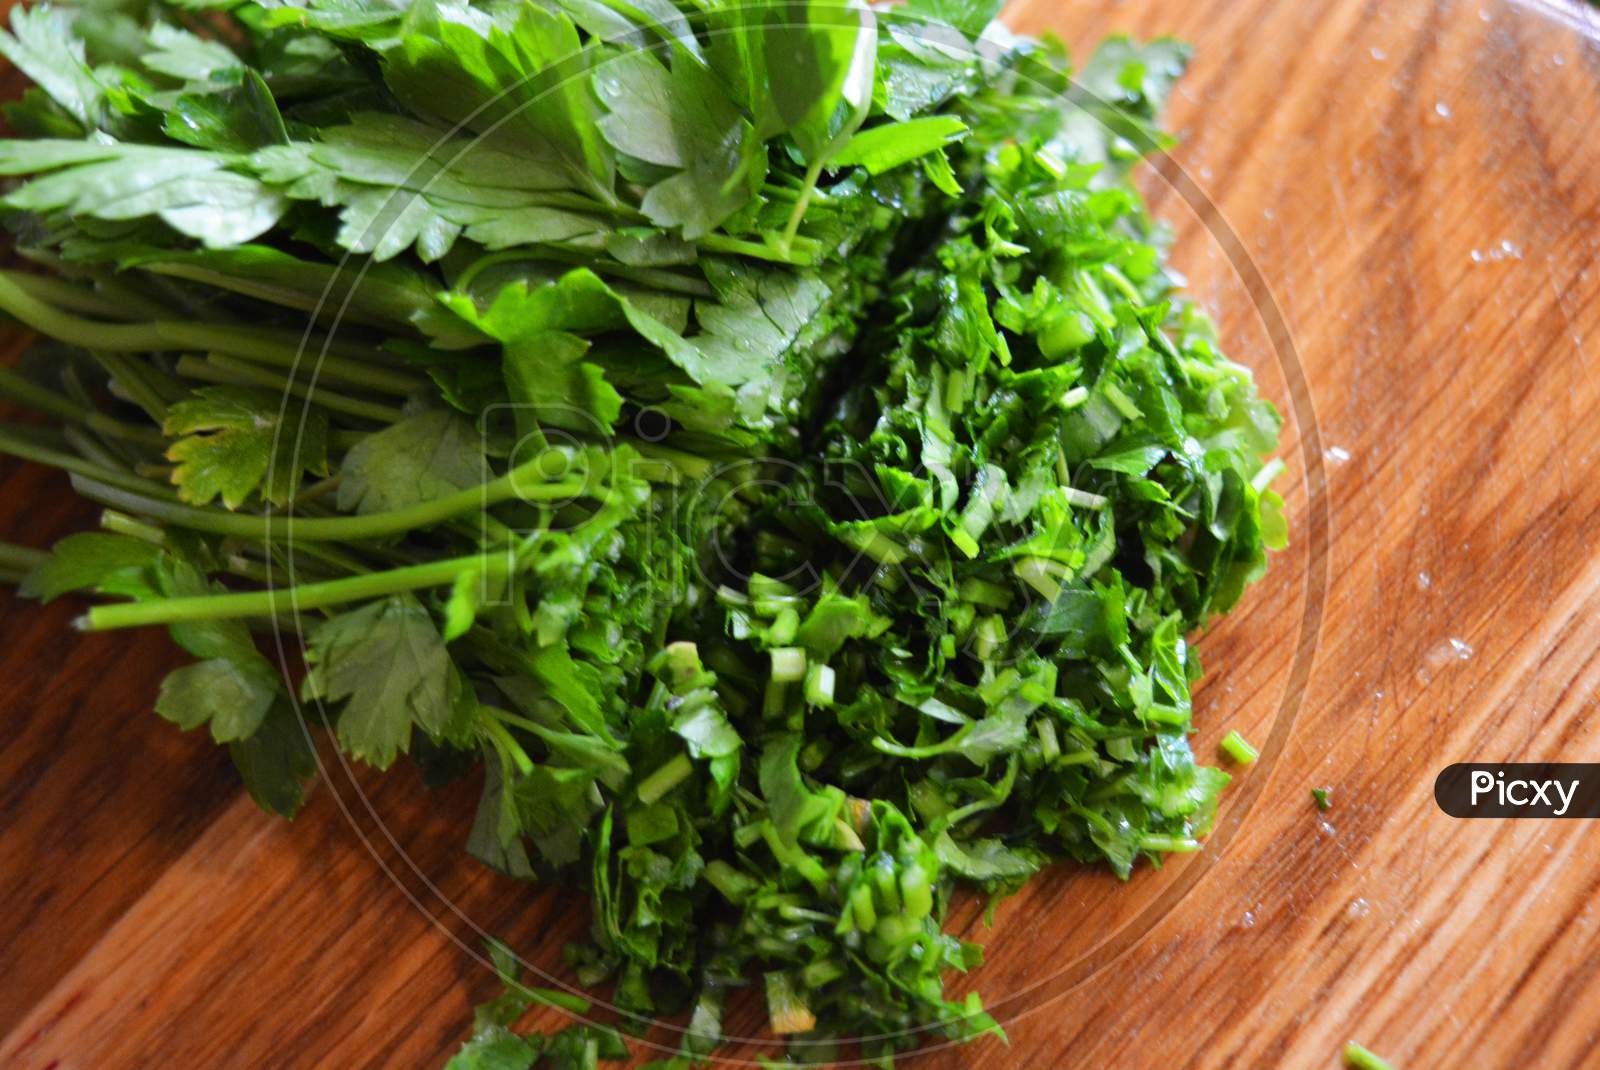 A bunch of green washed fresh parsley and chopped parsley for salad laid out on a wooden kitchen board.